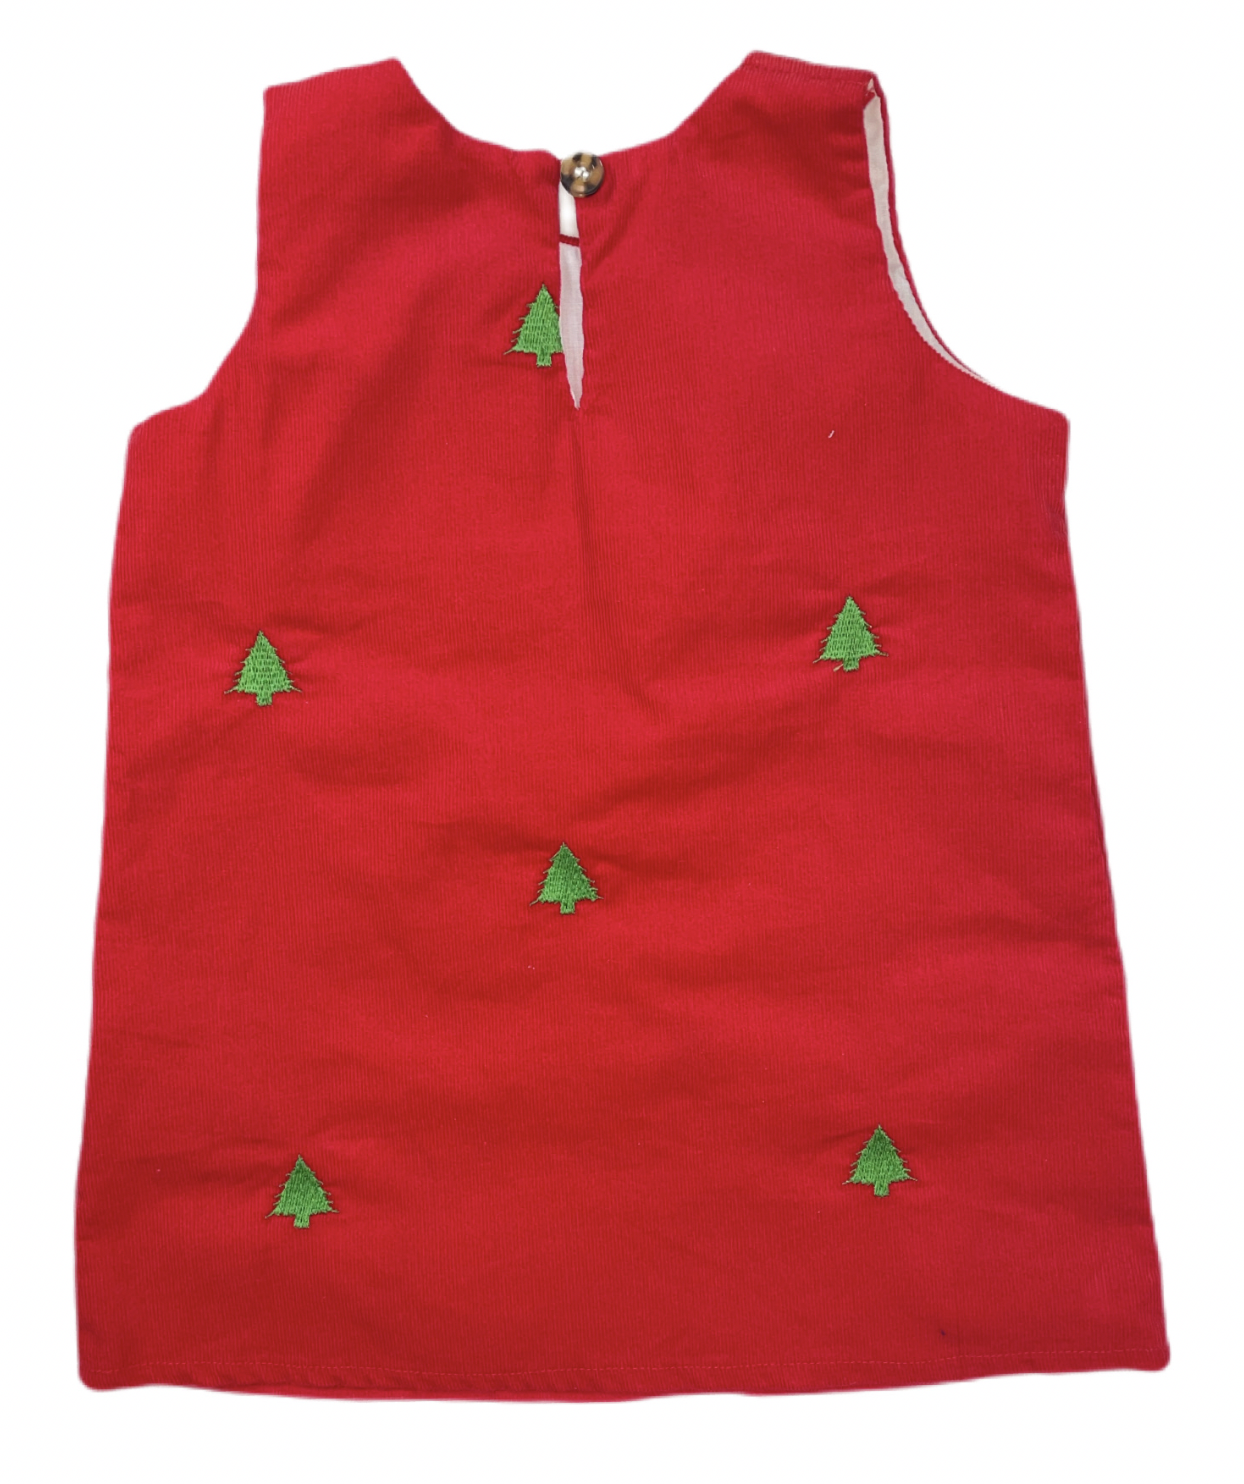 Red Corduroy Jumper Dress with Green Christmas Trees